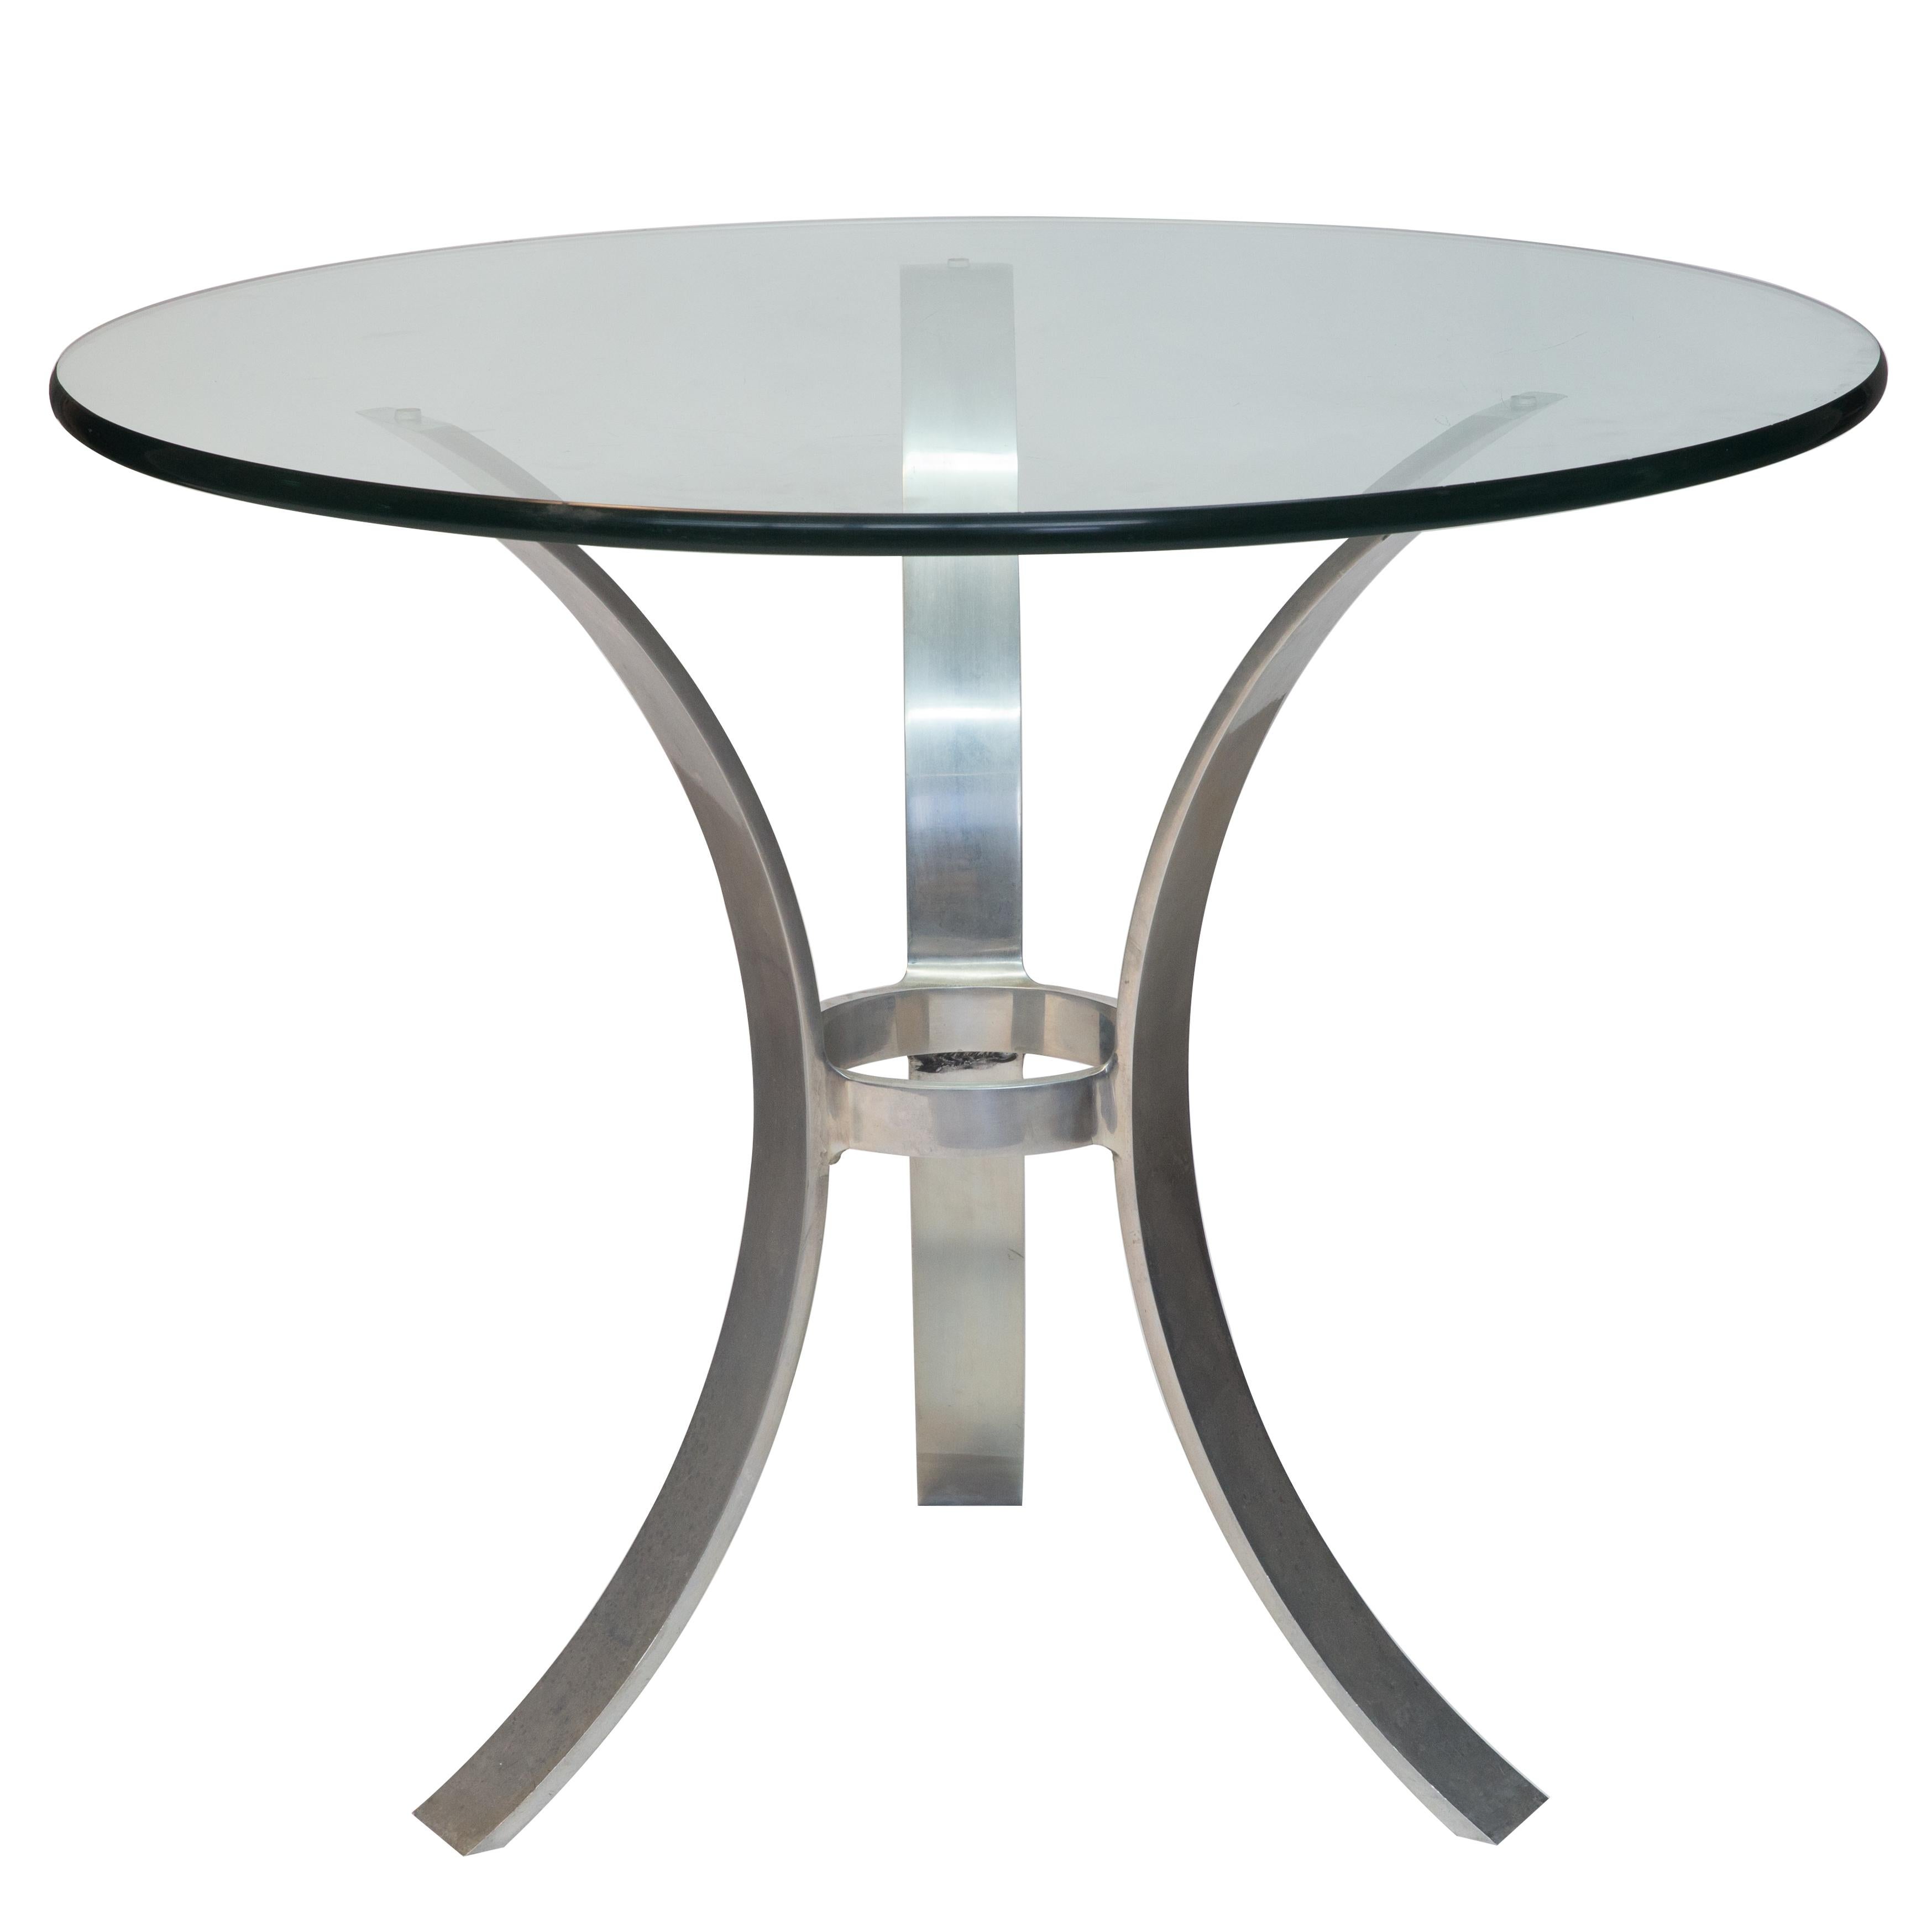 Offered is a John Vesey midcentury classic design round glass top table supported by a tripod polished aluminum base. Modernist furniture by American designer John Vesey has become very, very collectible in recent years. While Vesey began his career